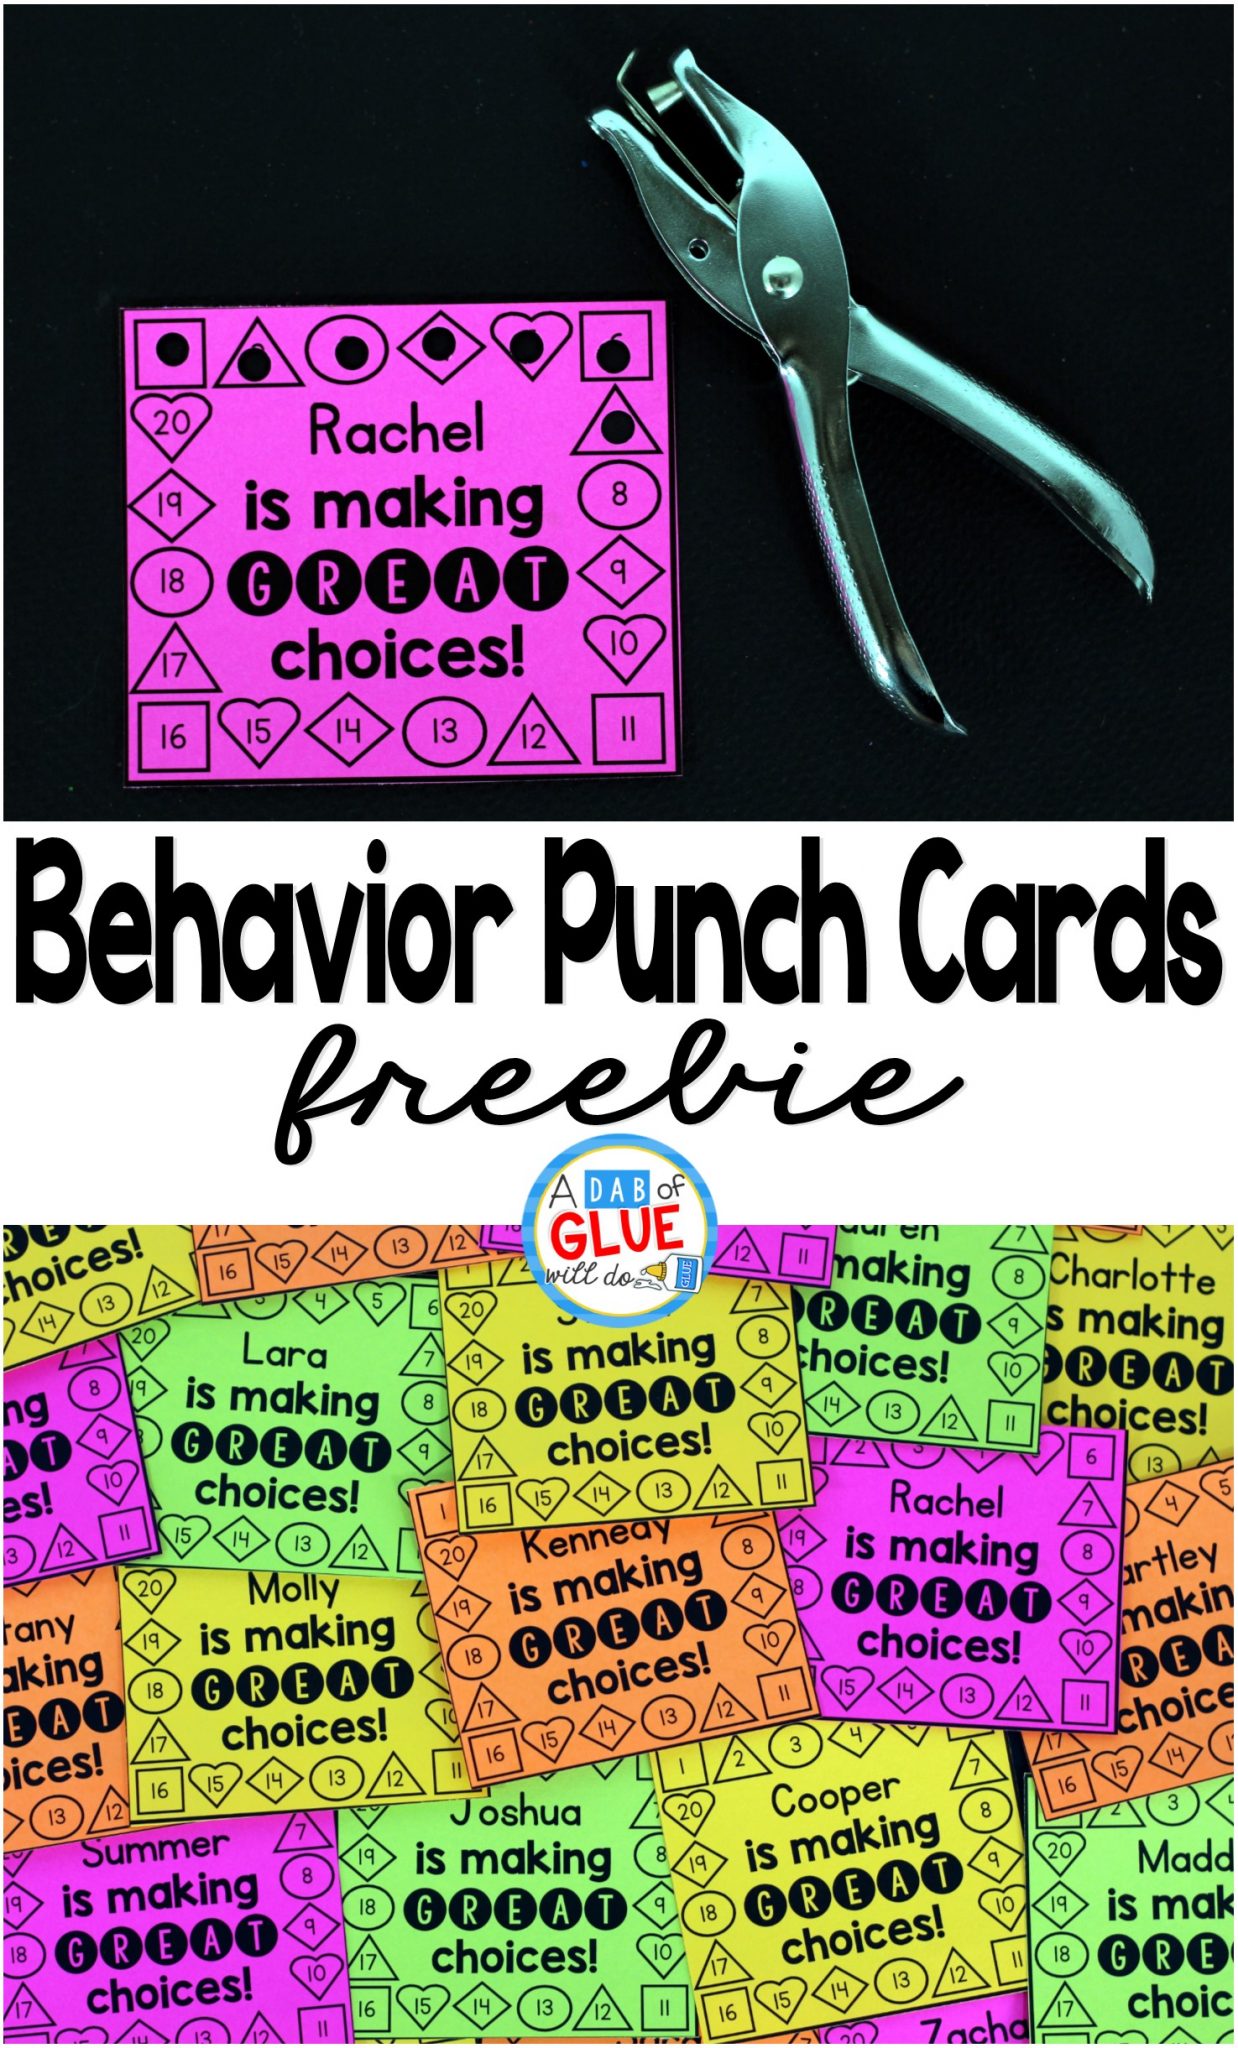 Are you looking for a fun, hands-on way to encourage your students to consistently make good choices? So was I and then I started implementing these behavior punch cards and suddenly my students were working VERY hard to earn their daily punch.